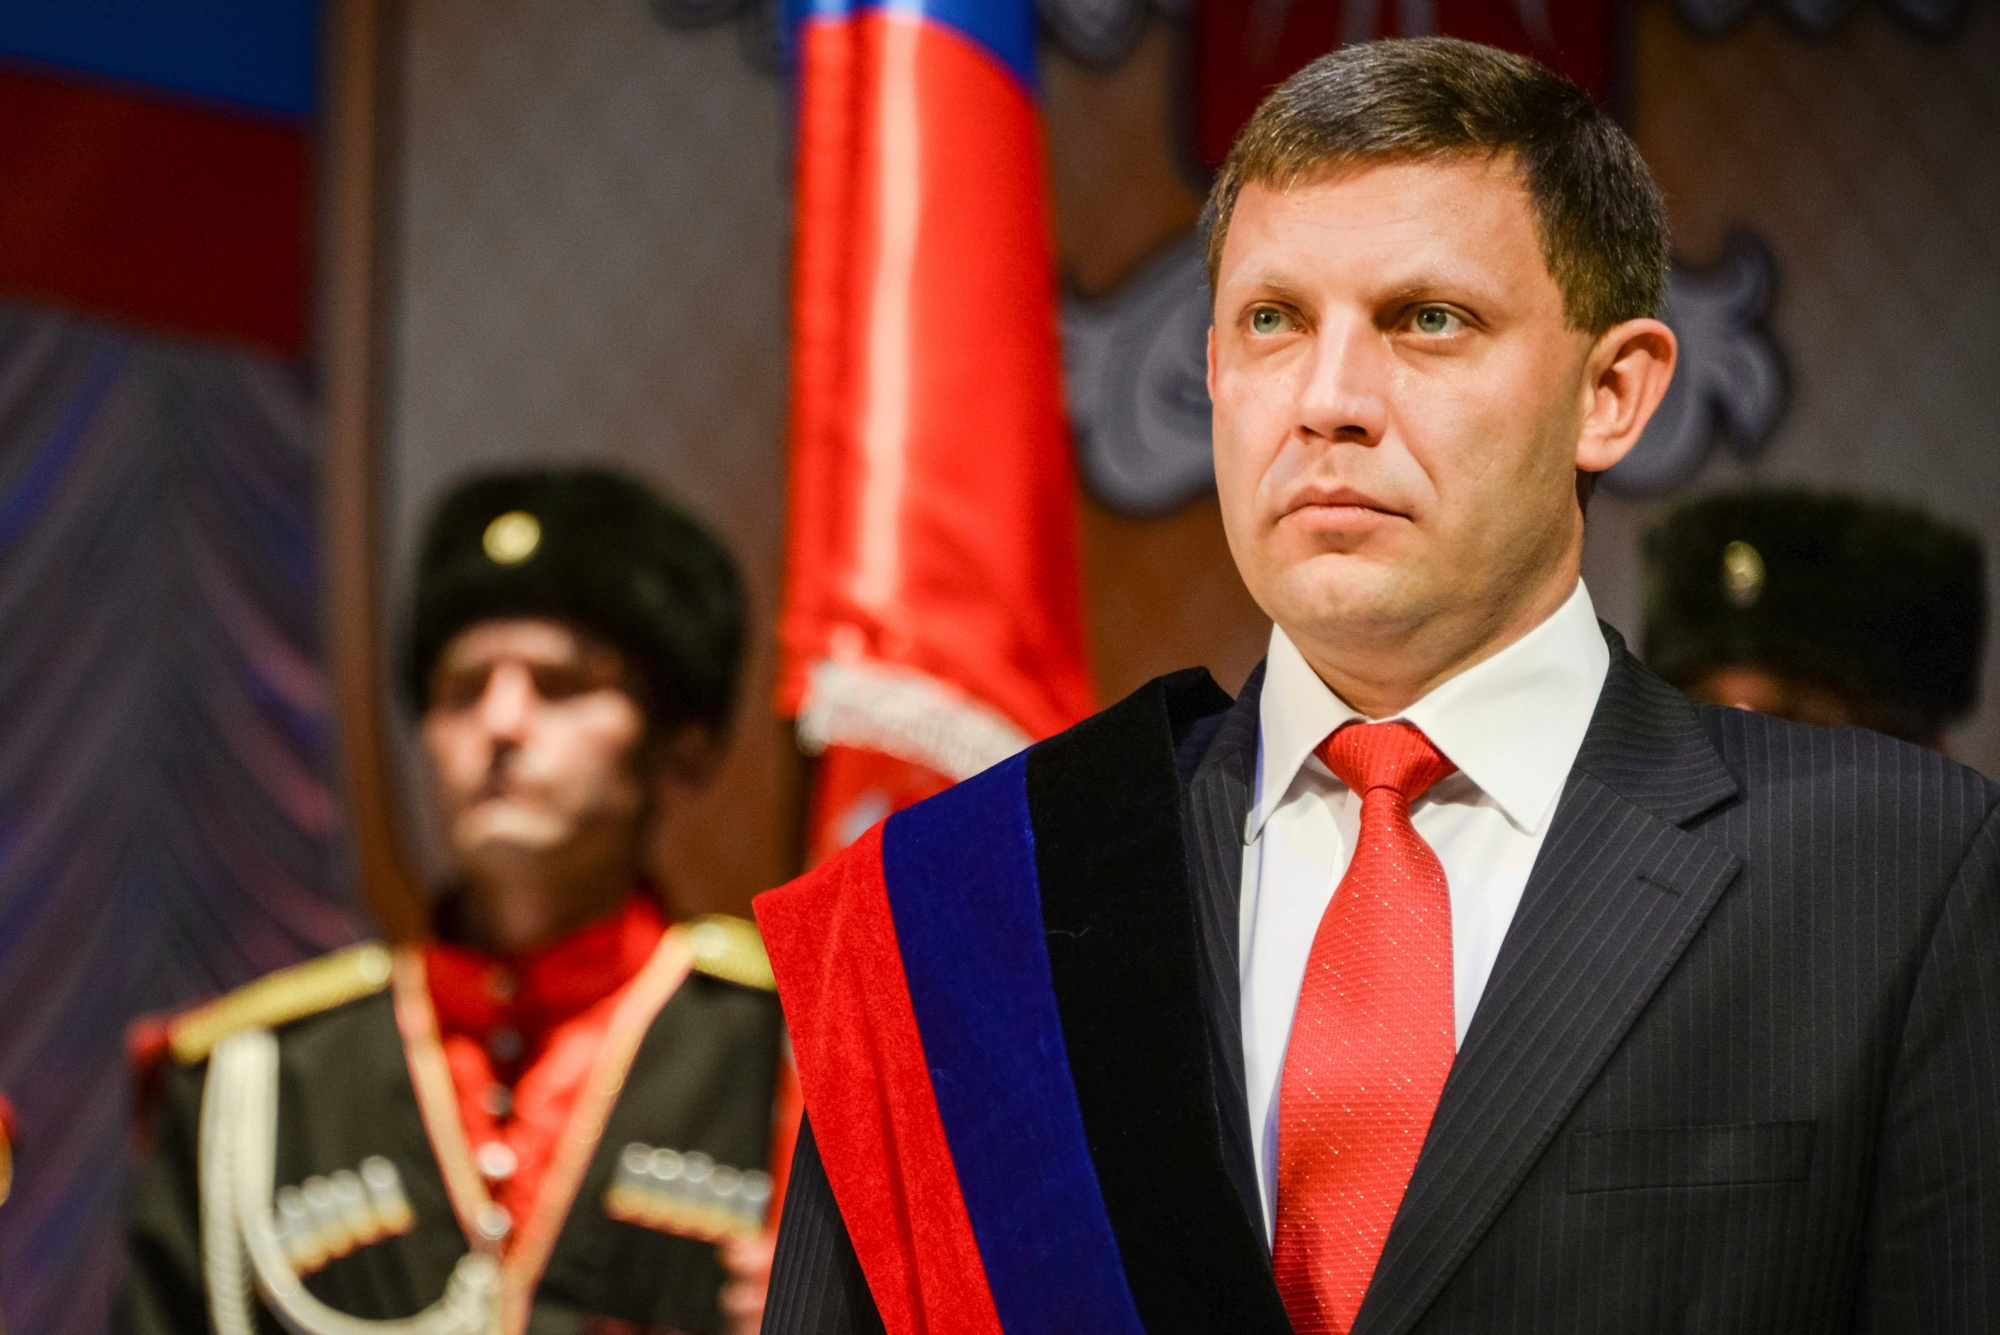 FILE - In this Tuesday, Nov. 4, 2014 file photo, rebel leader Alexander Zakharchenko stands during a swearing in ceremony in Donetsk, Ukraine. Separatists in eastern Ukraine on Tuesday, July 18, 2017 proclaimed a new state that aspires to include not only the areas they control but also the rest of the country. Donetsk separatist leader Alexander Zakharchenko said in comments broadcast on Russian television that rebels in Donetsk and Luhansk as well as representatives of other Ukrainian regions would form a state called Malorossiya. (AP Photo/Mstyslav Chernov, file) Ukraine